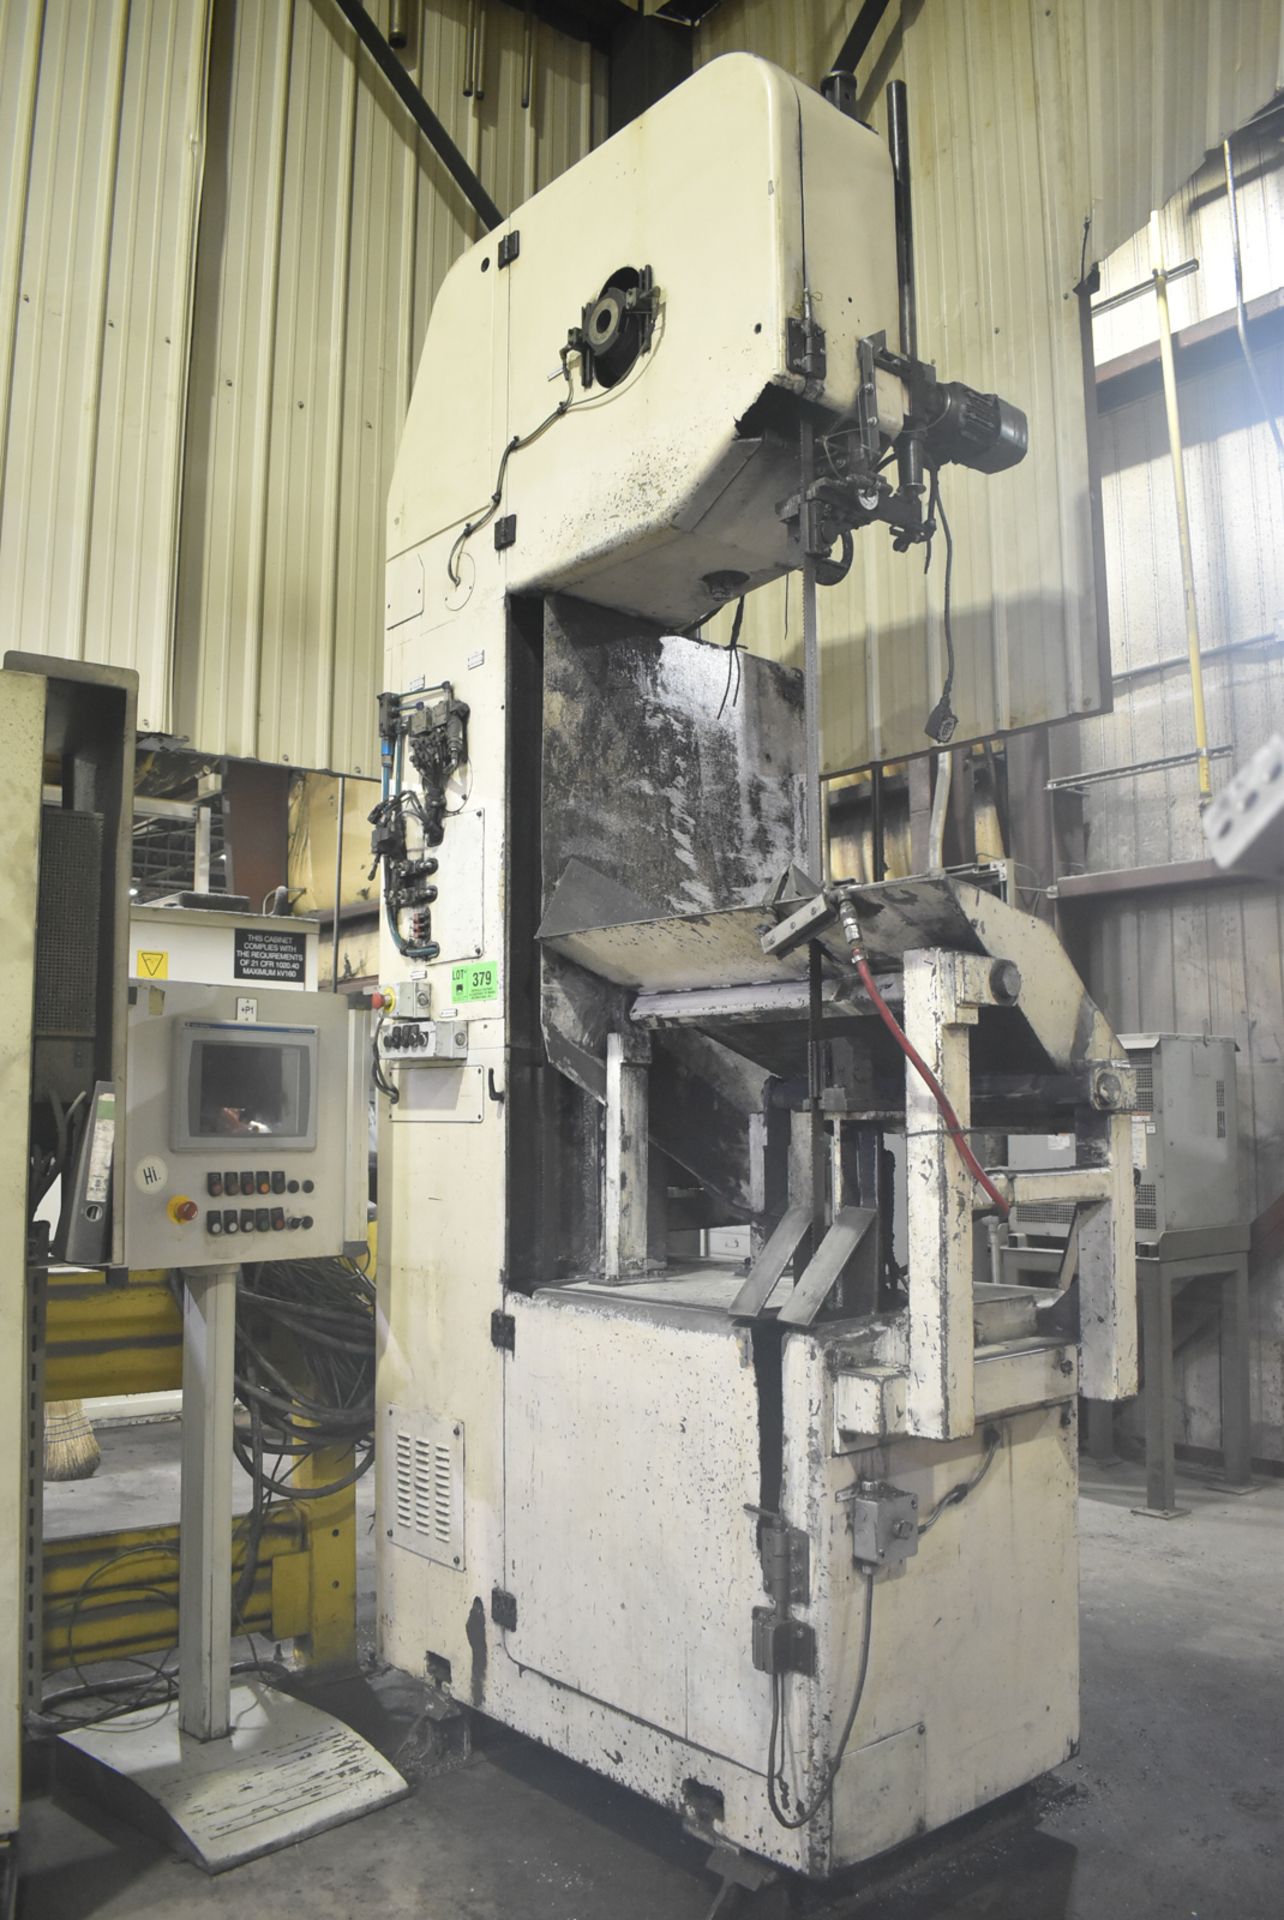 MFG UNKNOWN LARGE CAPACITY HEAVY DUTY FLOOR TYPE VERTICAL BAND SAW WITH ALLEN BRADLEY PANELVIEW PLUS